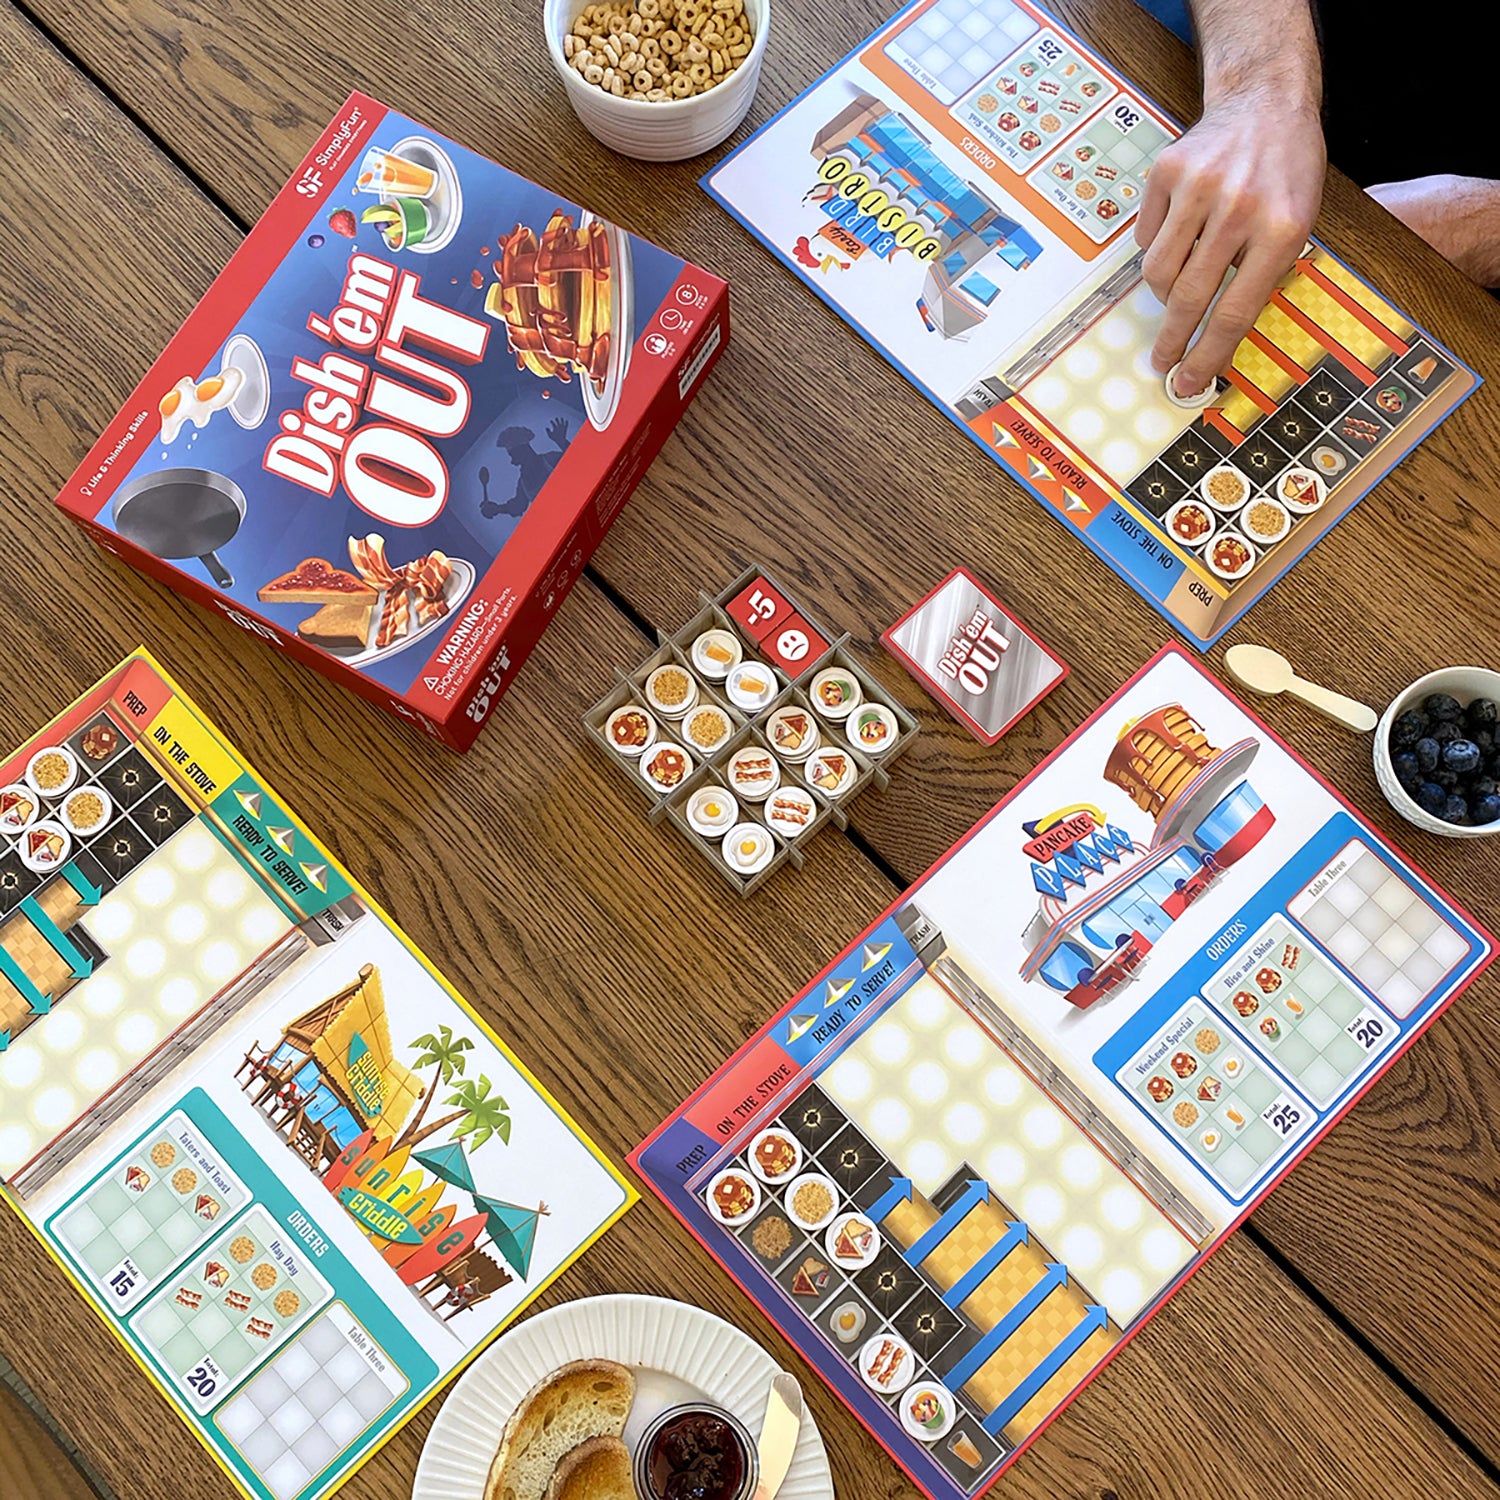 Dish 'em Out: A Diner-Theme Strategy Game – SimplyFun